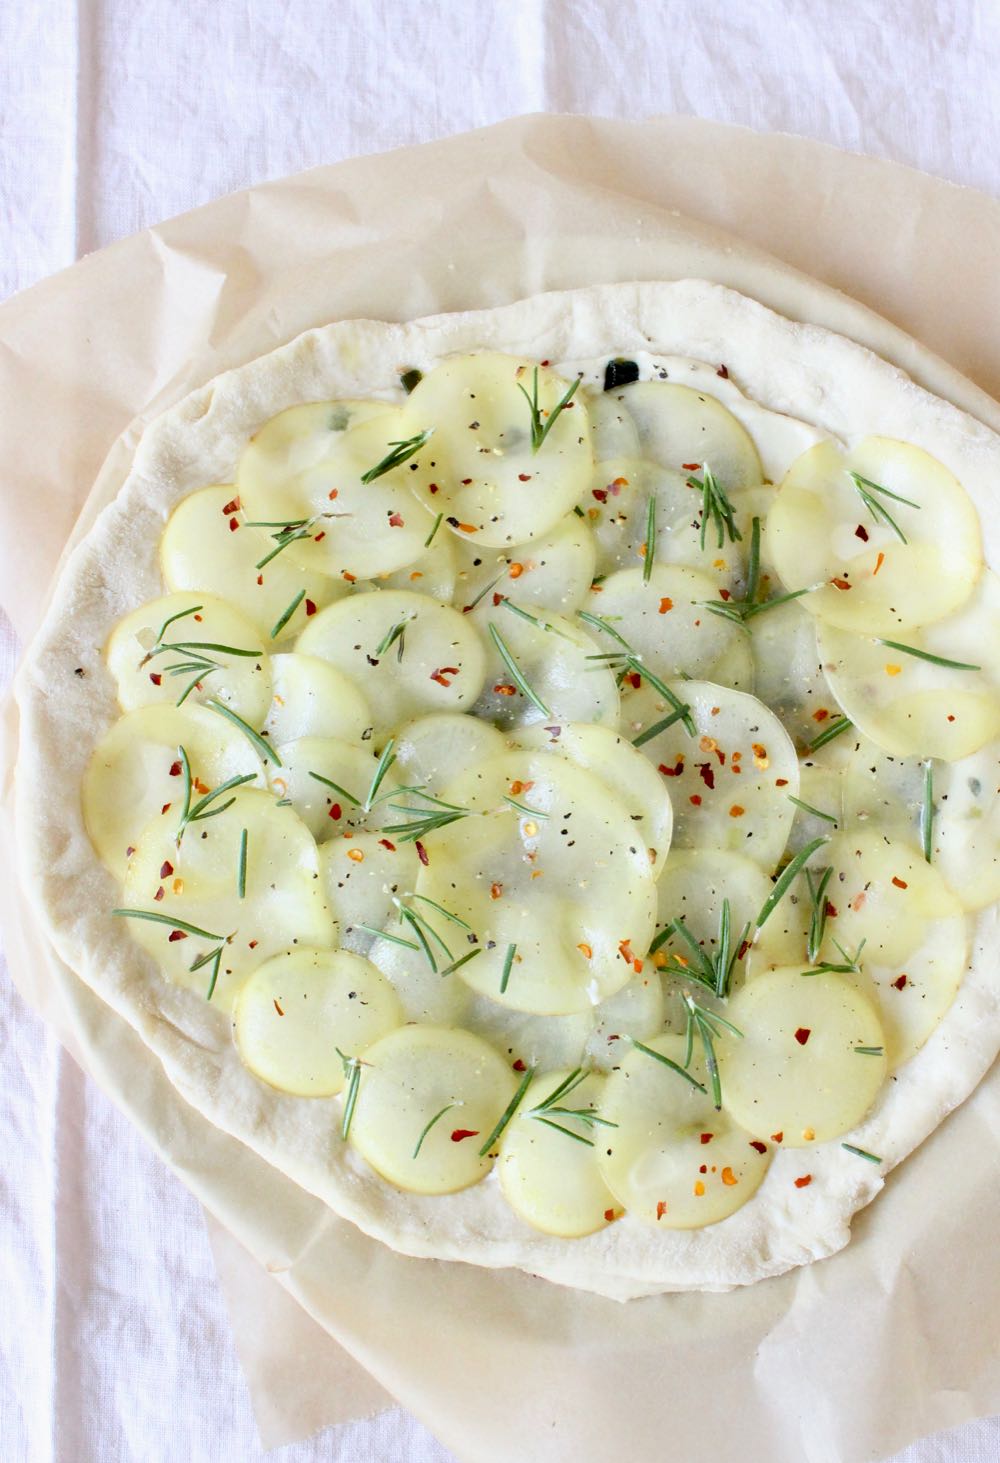 Step 2: cover pizza dough with thinly sliced potatoes and rosemary